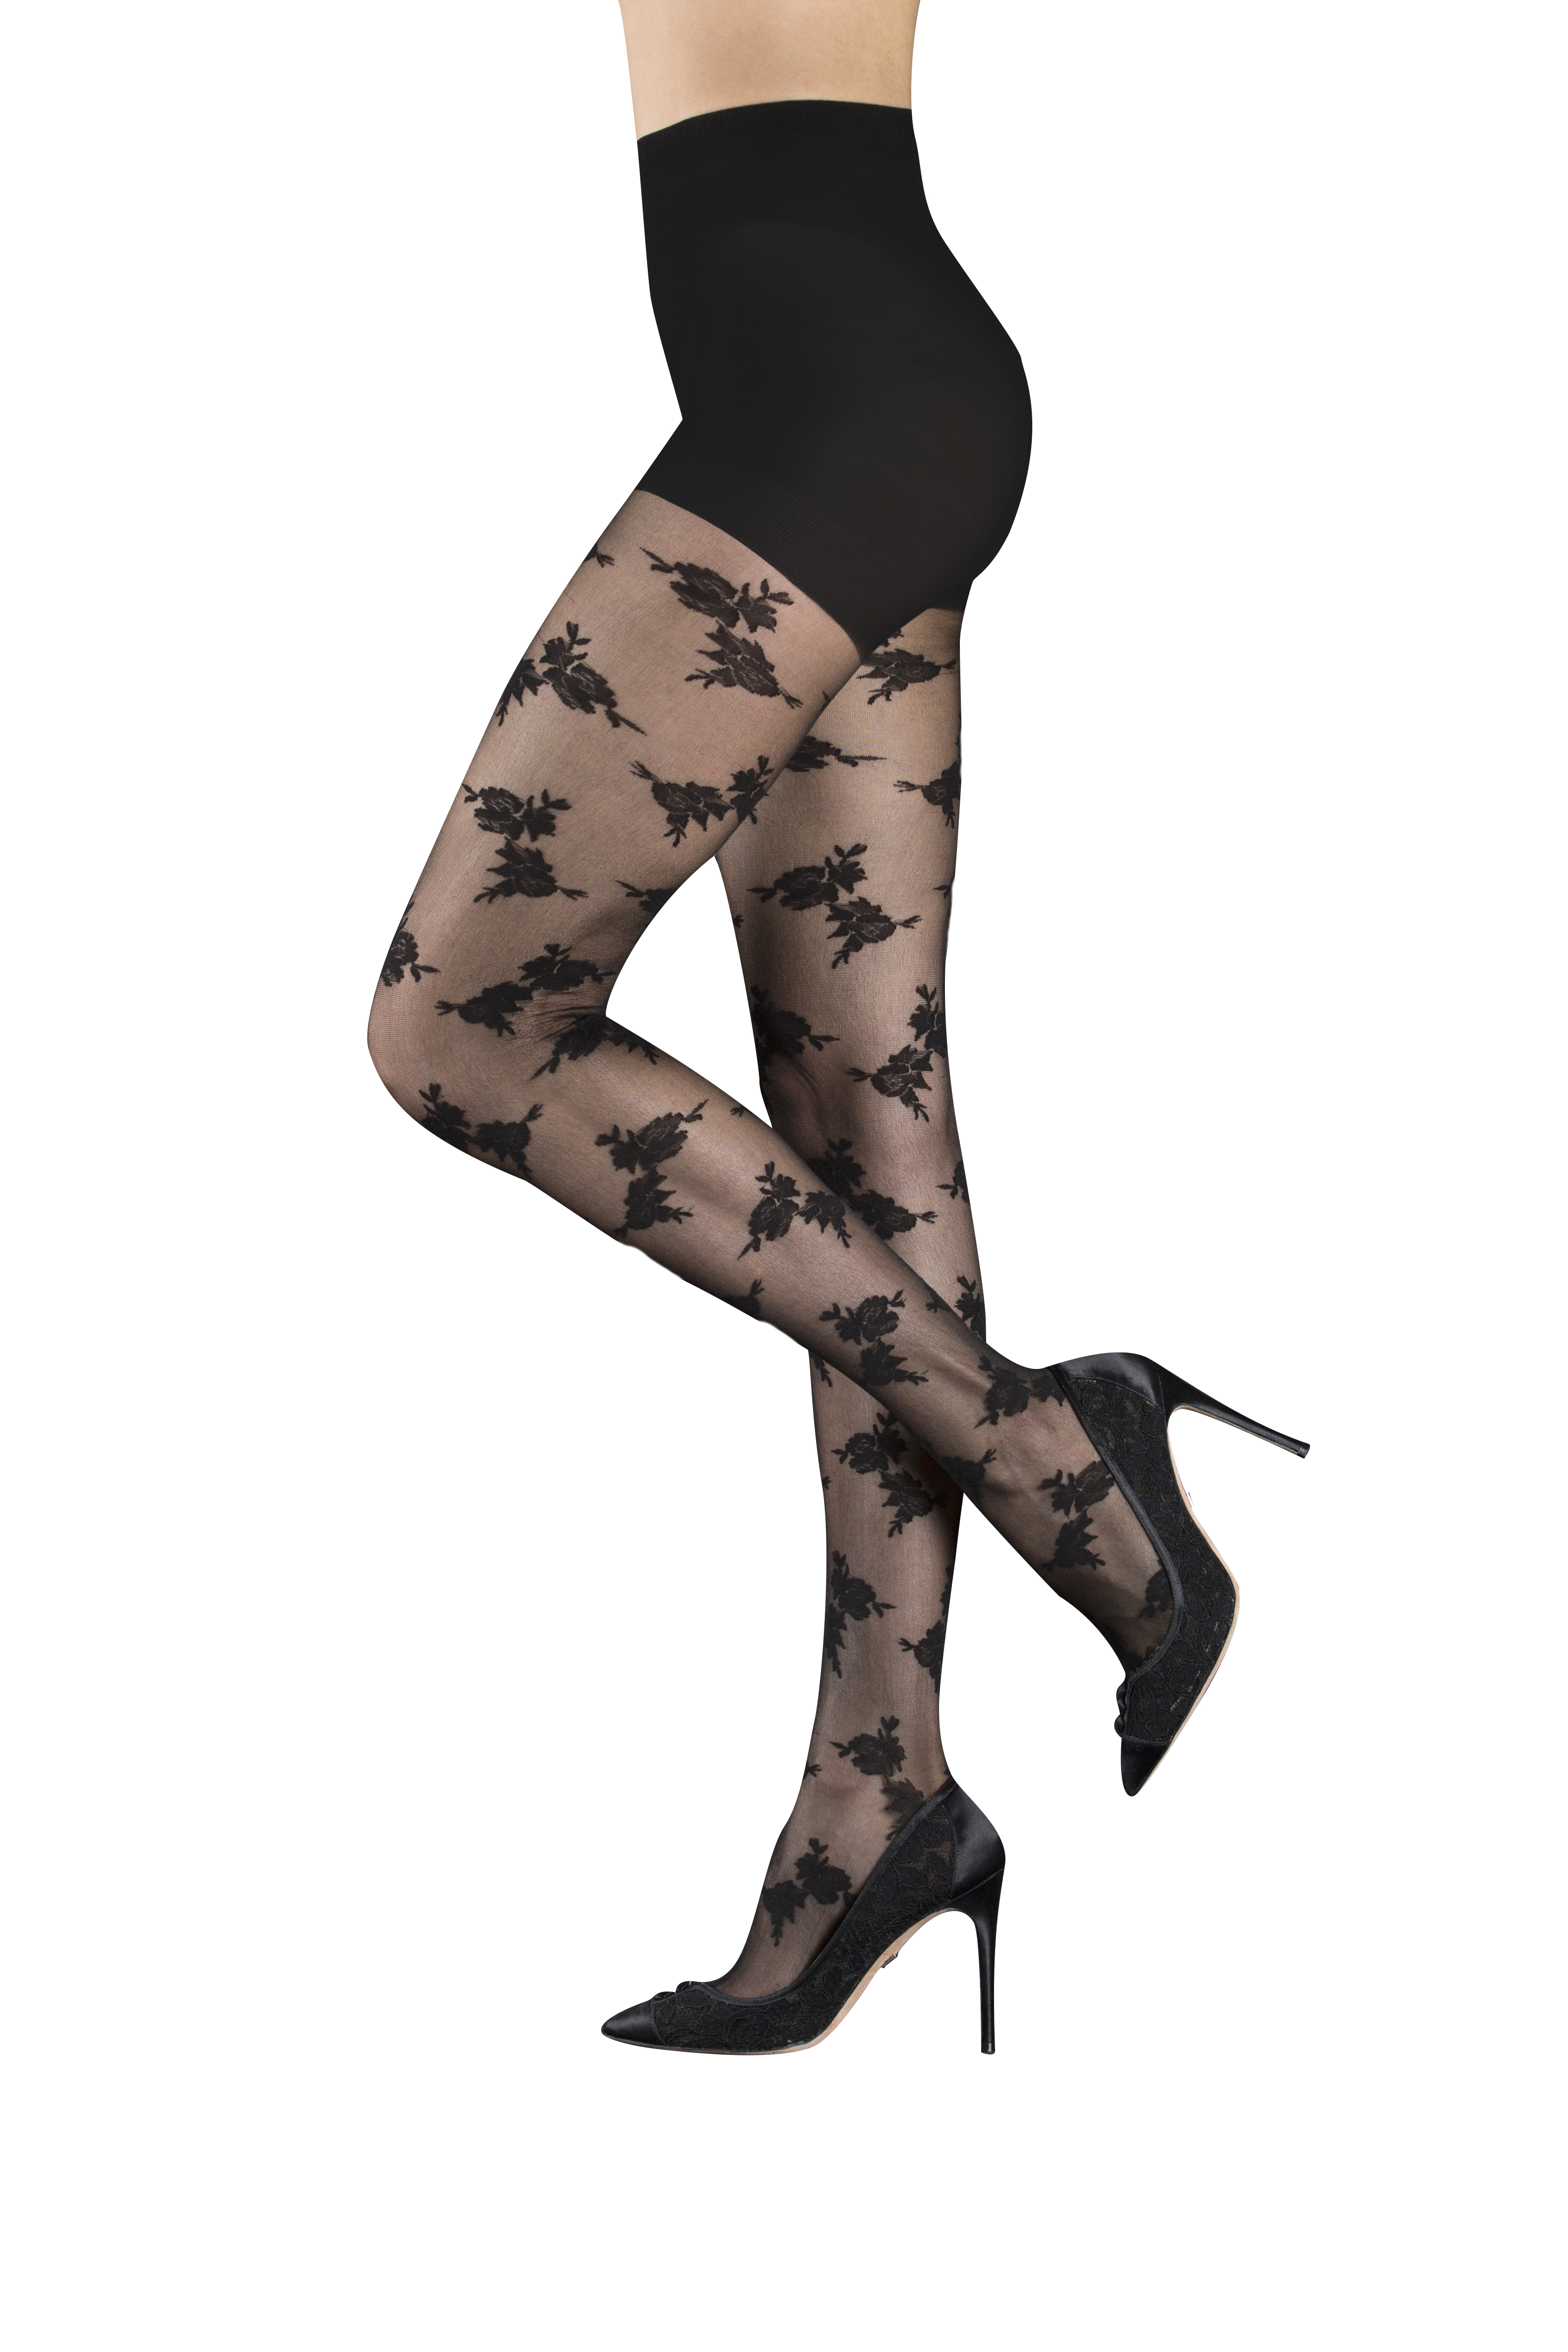 Retro Floral White Lace Mesh Bottomed Pantyhose Stockings For Women From  Honeytoystore, $4.07